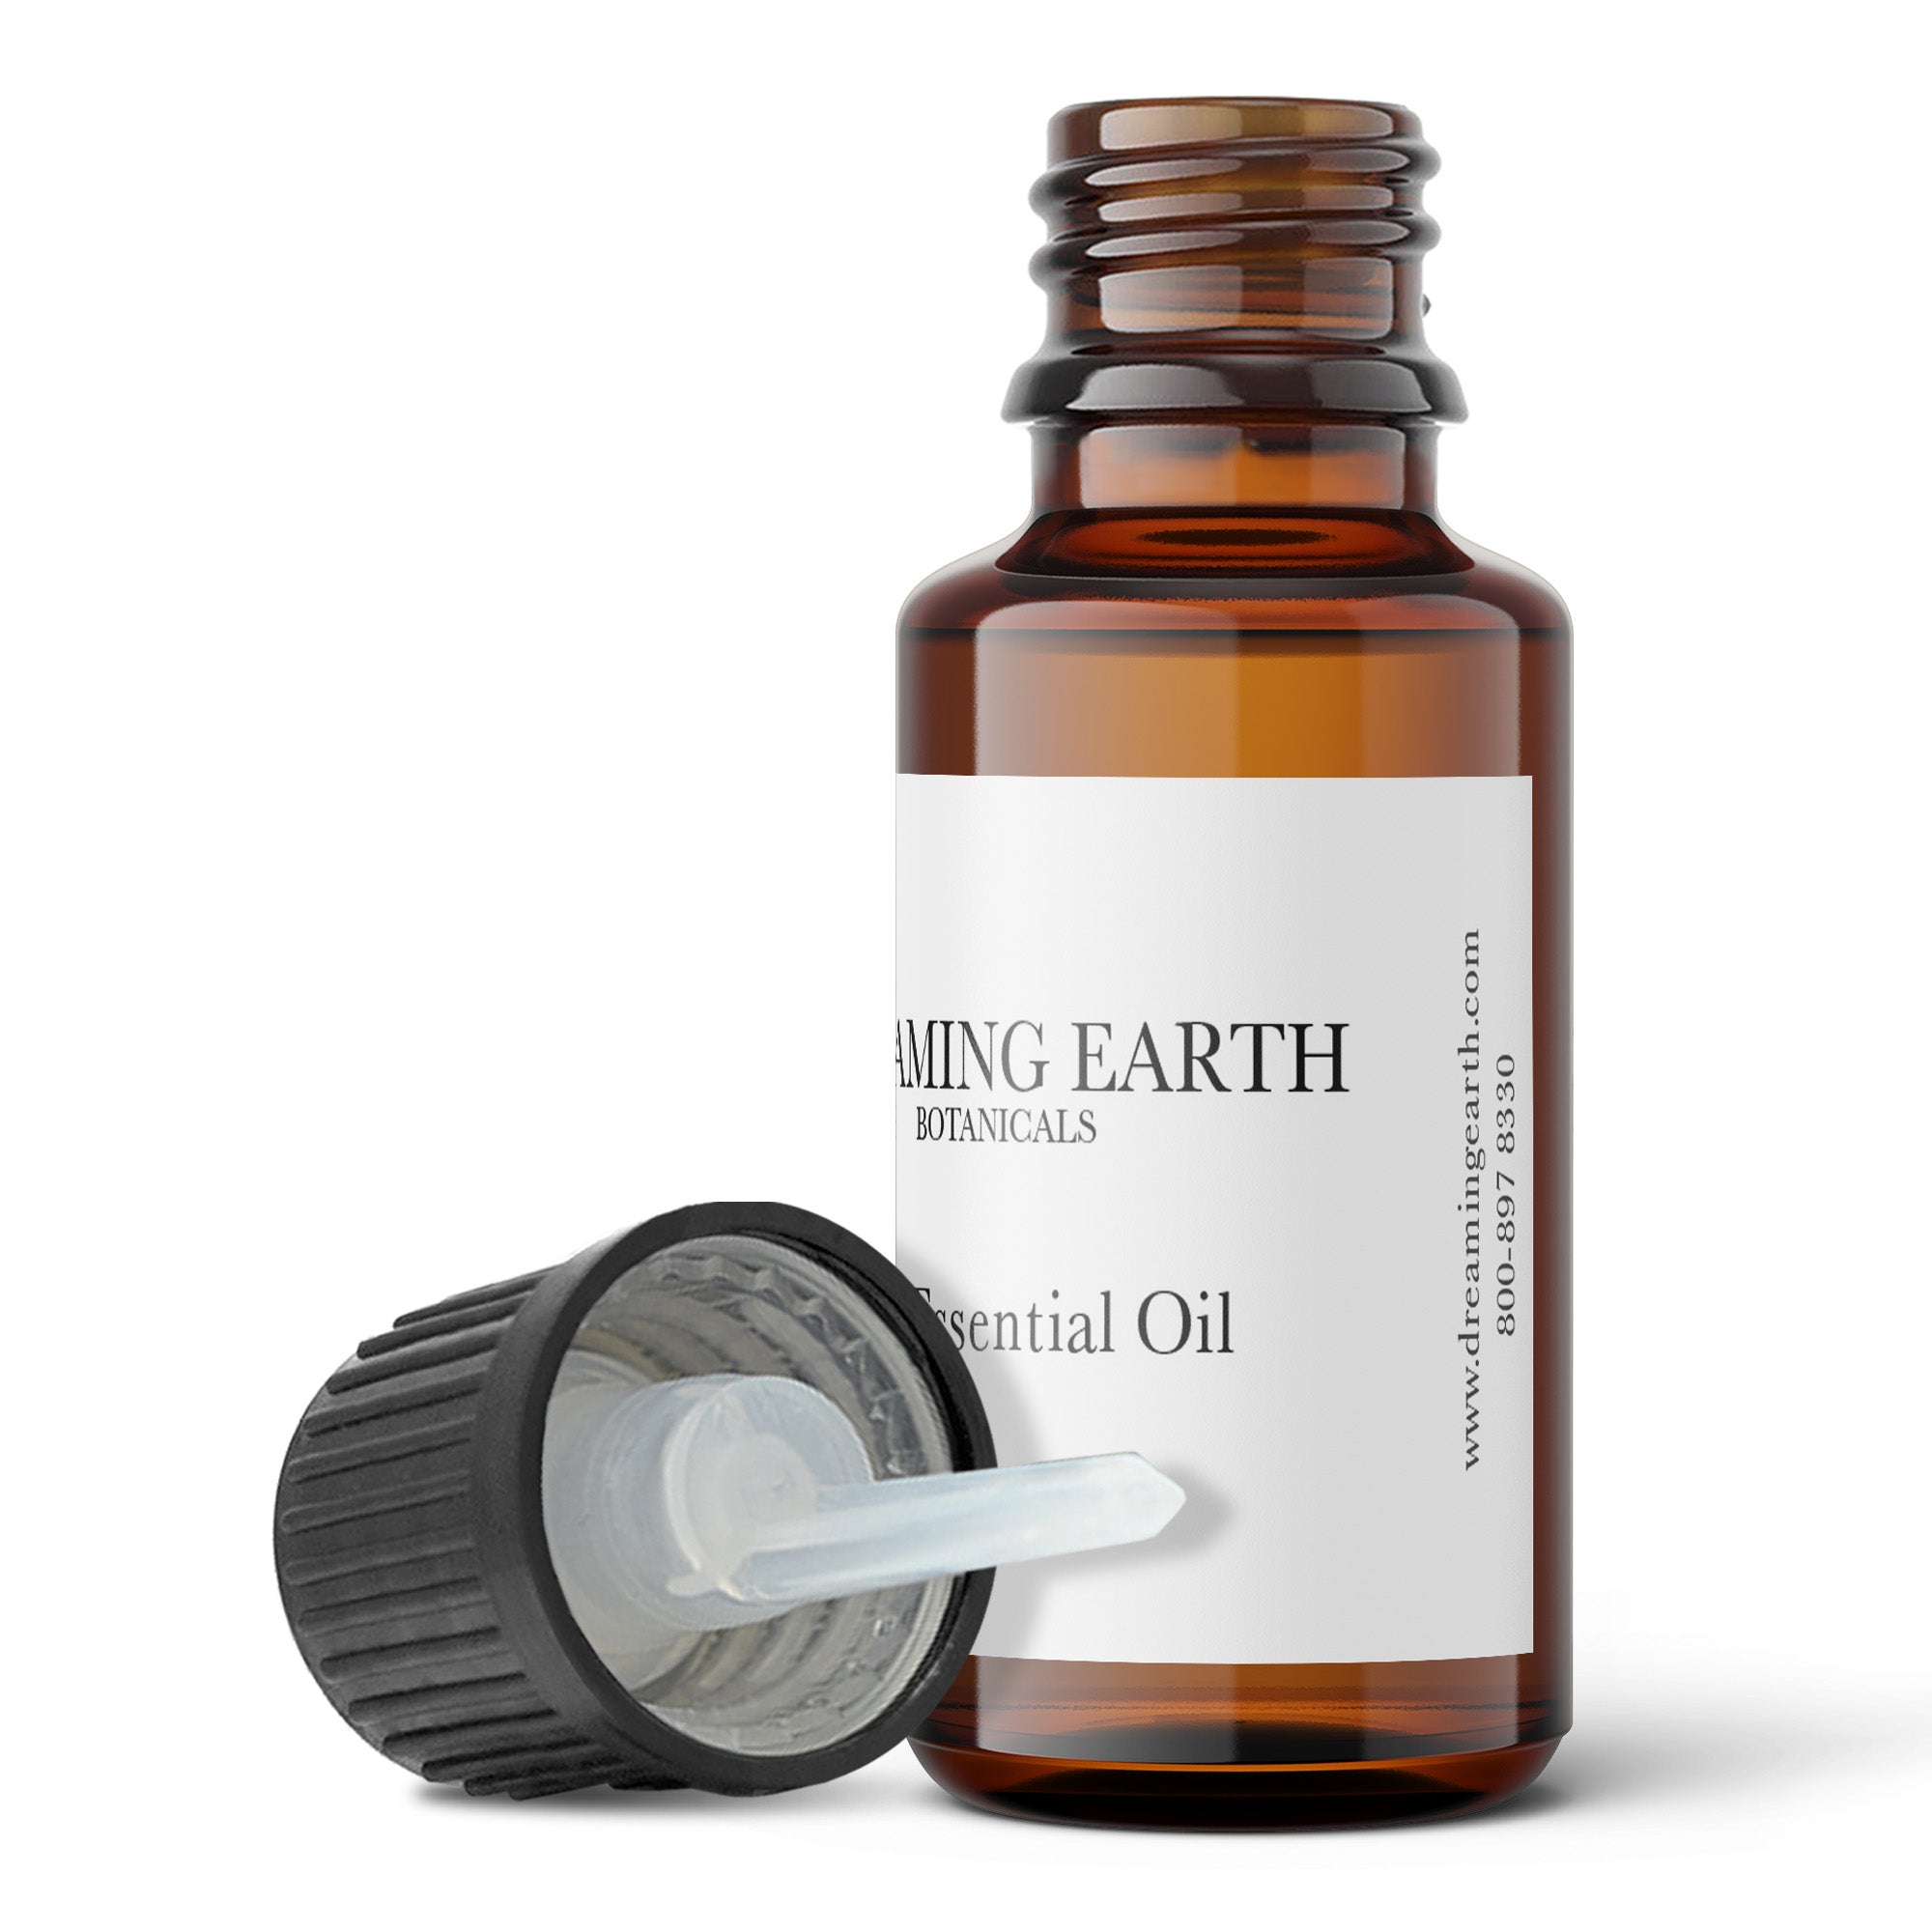 Load image into Gallery viewer, Lavender, Spike Essential Oil, Organic - Dreaming Earth Inc
